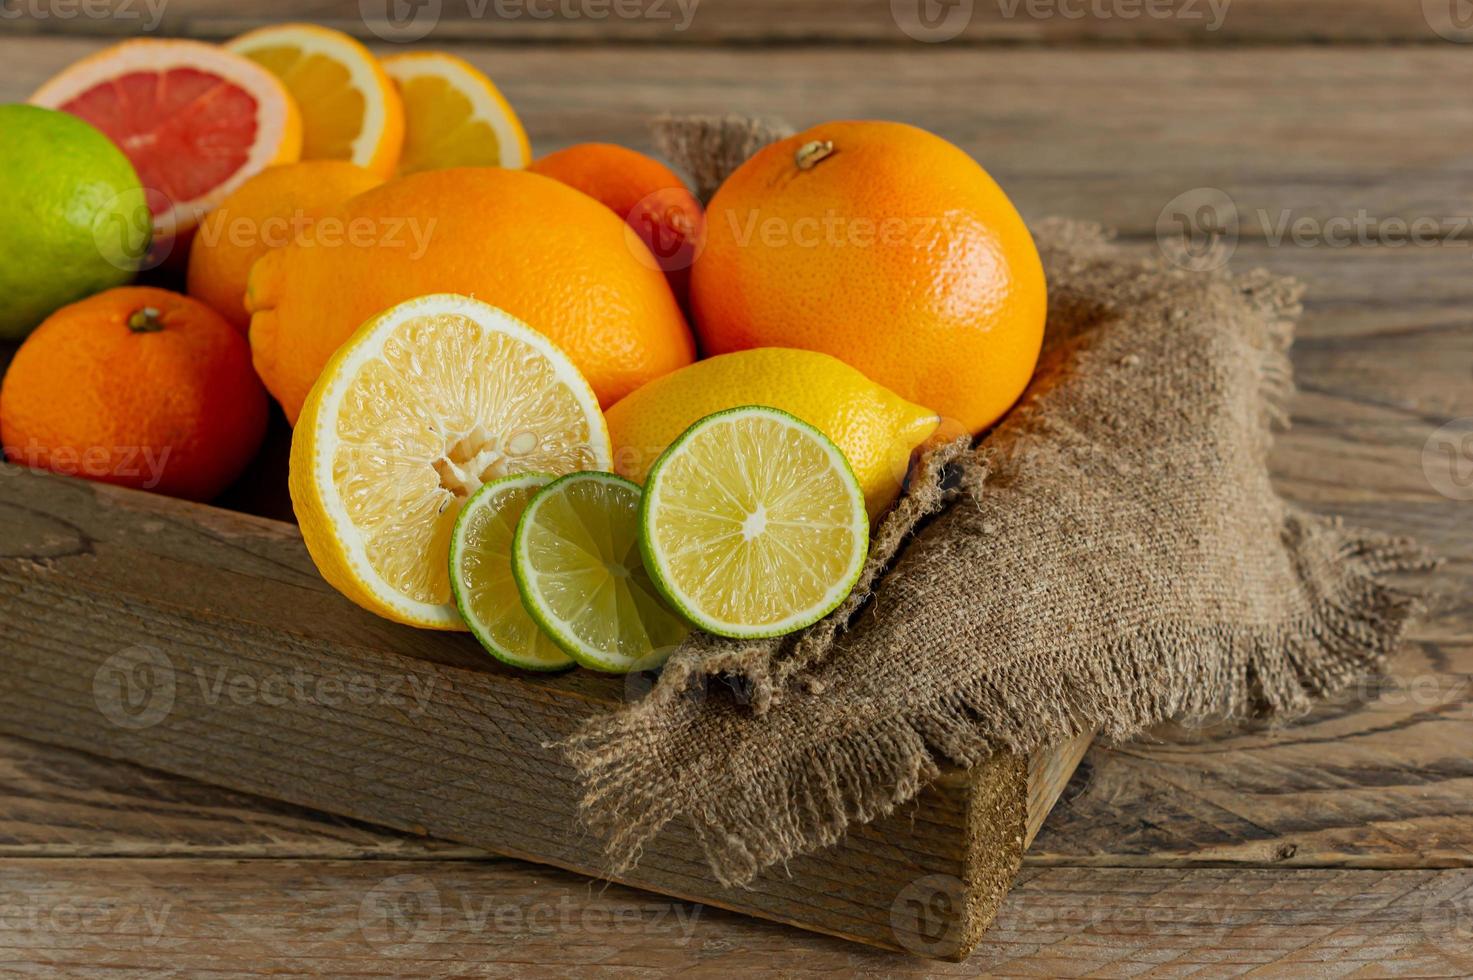 Assorted citrus fruits in a wooden box. Orange, tangerine, grapefruit, lemon and lime. On a wooden background photo